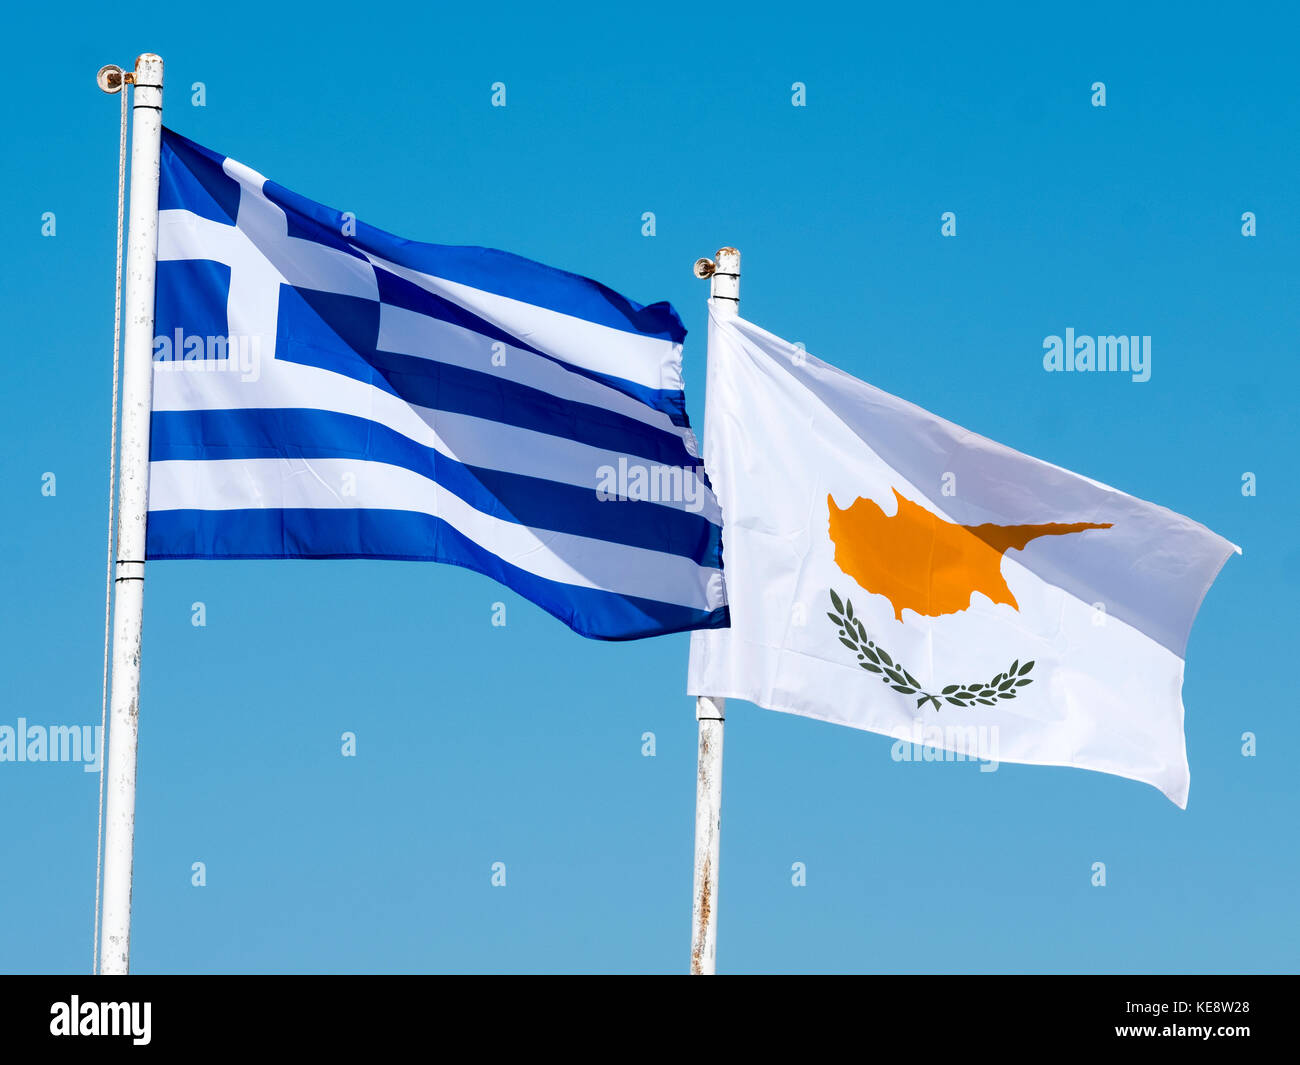 The flags of Greece and Cyprus flutter against a blue sky in Paphos Cyprus. Stock Photo